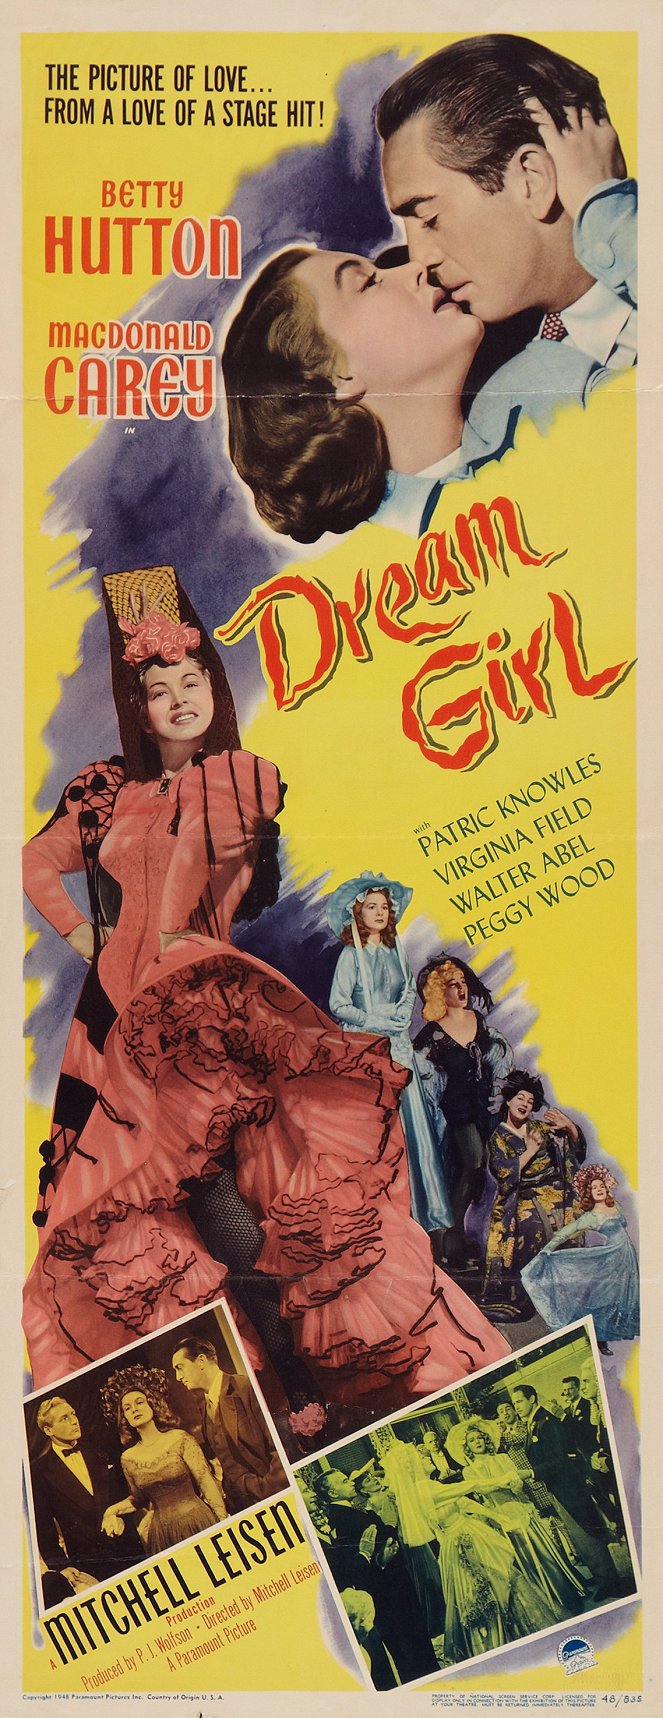 Dream Girl - Posters